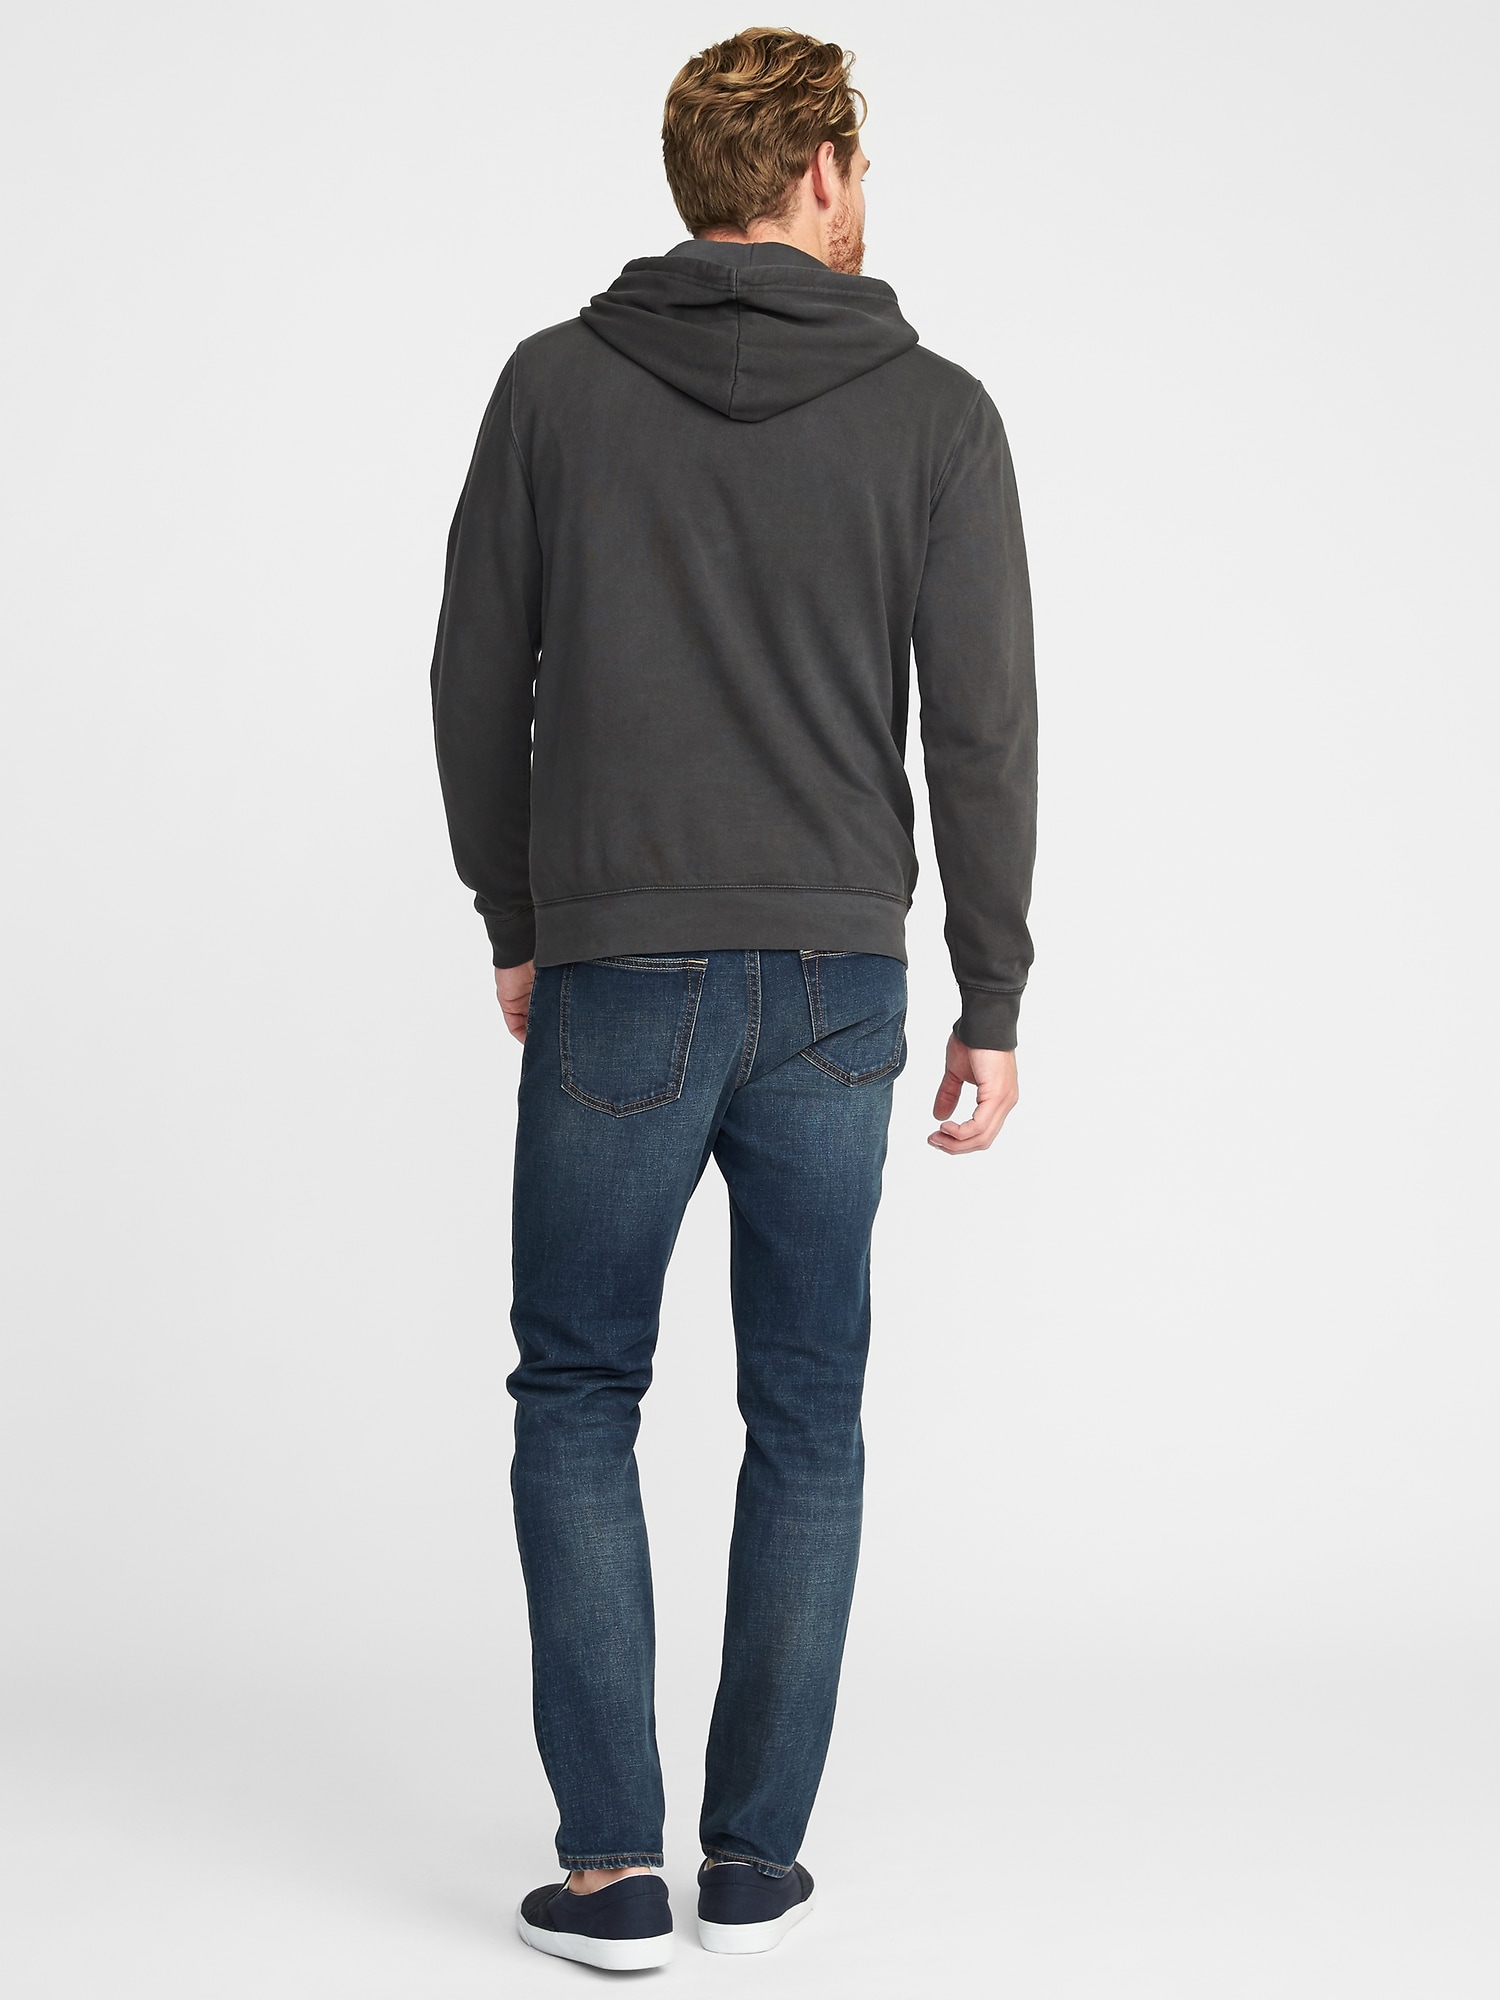 Classic Garment-Dyed Pullover Hoodie for Men | Old Navy